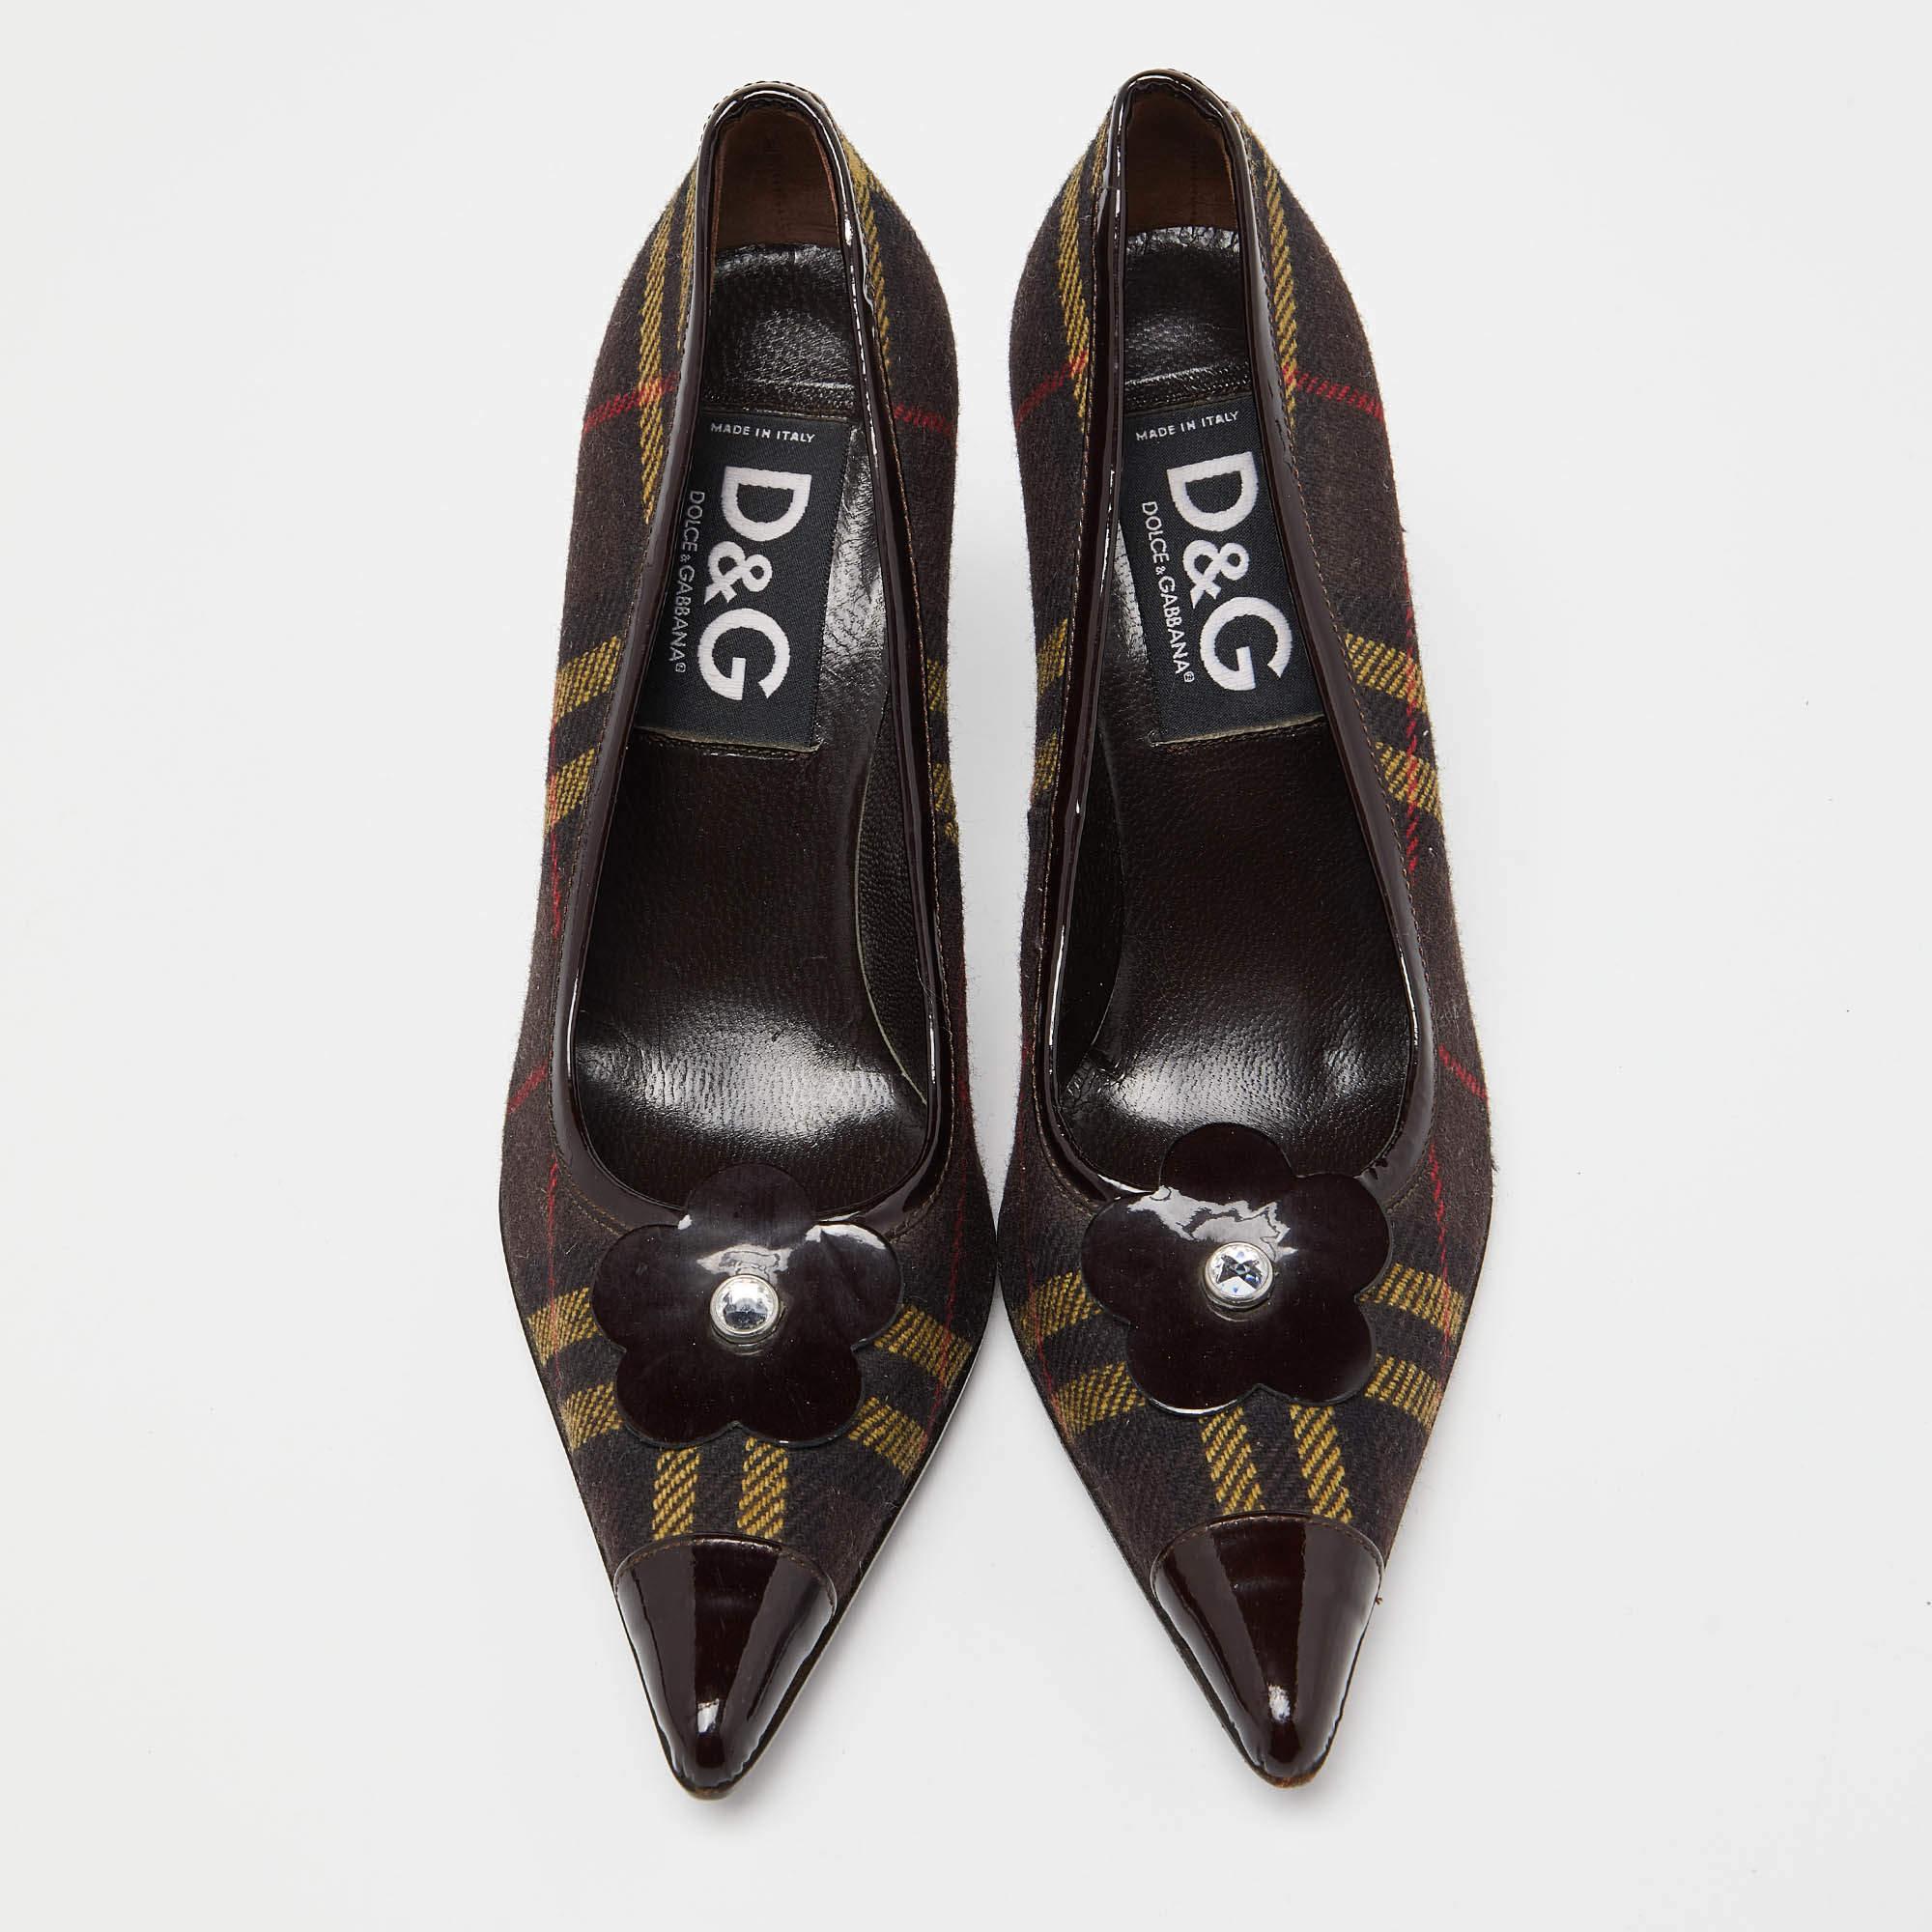 D&G Brown Plaid Wool and Patent Leather Pointed Toe Pumps Size 37.5 In New Condition For Sale In Dubai, Al Qouz 2